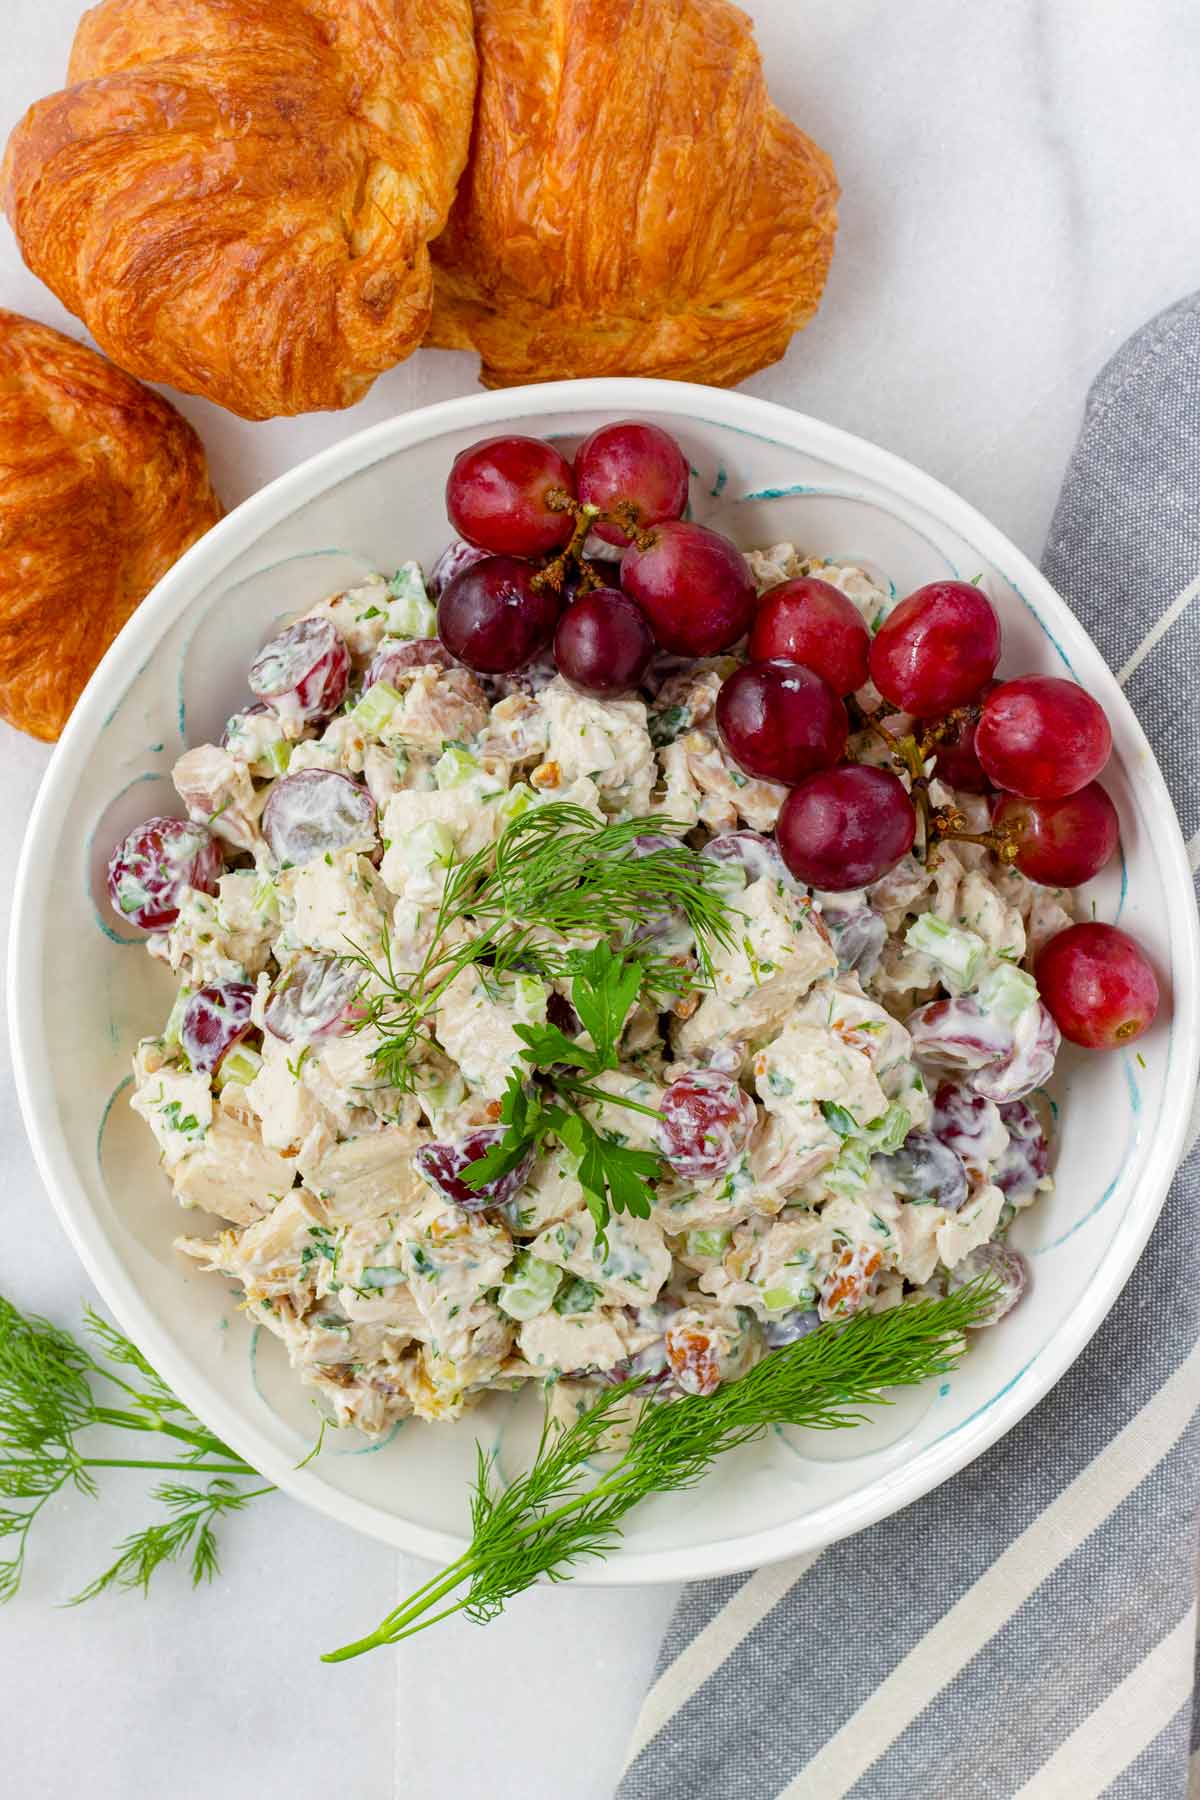 diced chicken with grapes, mayo, celery, walnuts, and fresh herbs